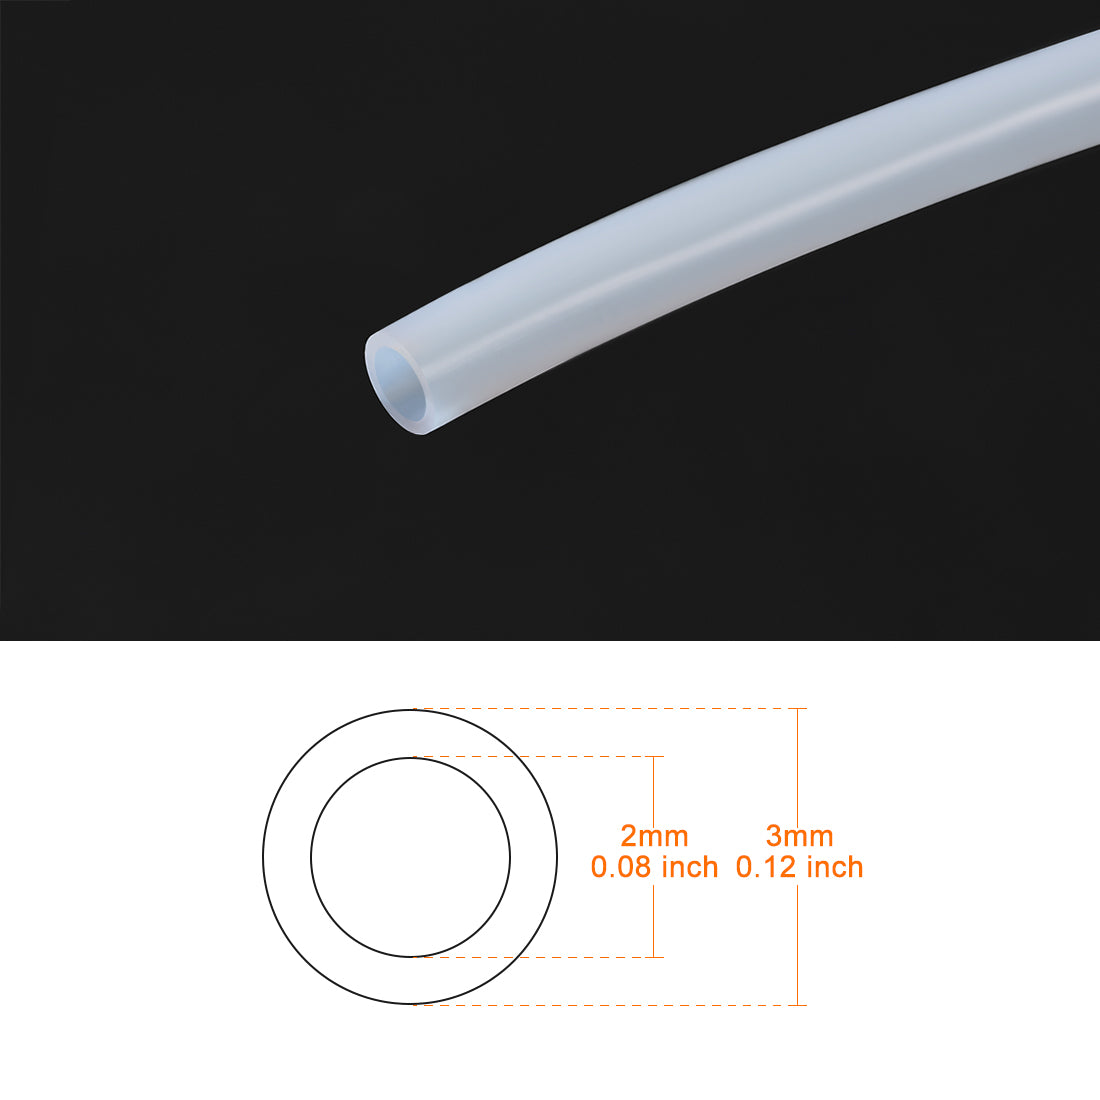 Uxcell Uxcell PTFE Tube Tubing 1 Meter 3.3ft Lengh Pipe 1mm ID 3mm OD for 3D Printer RepRap